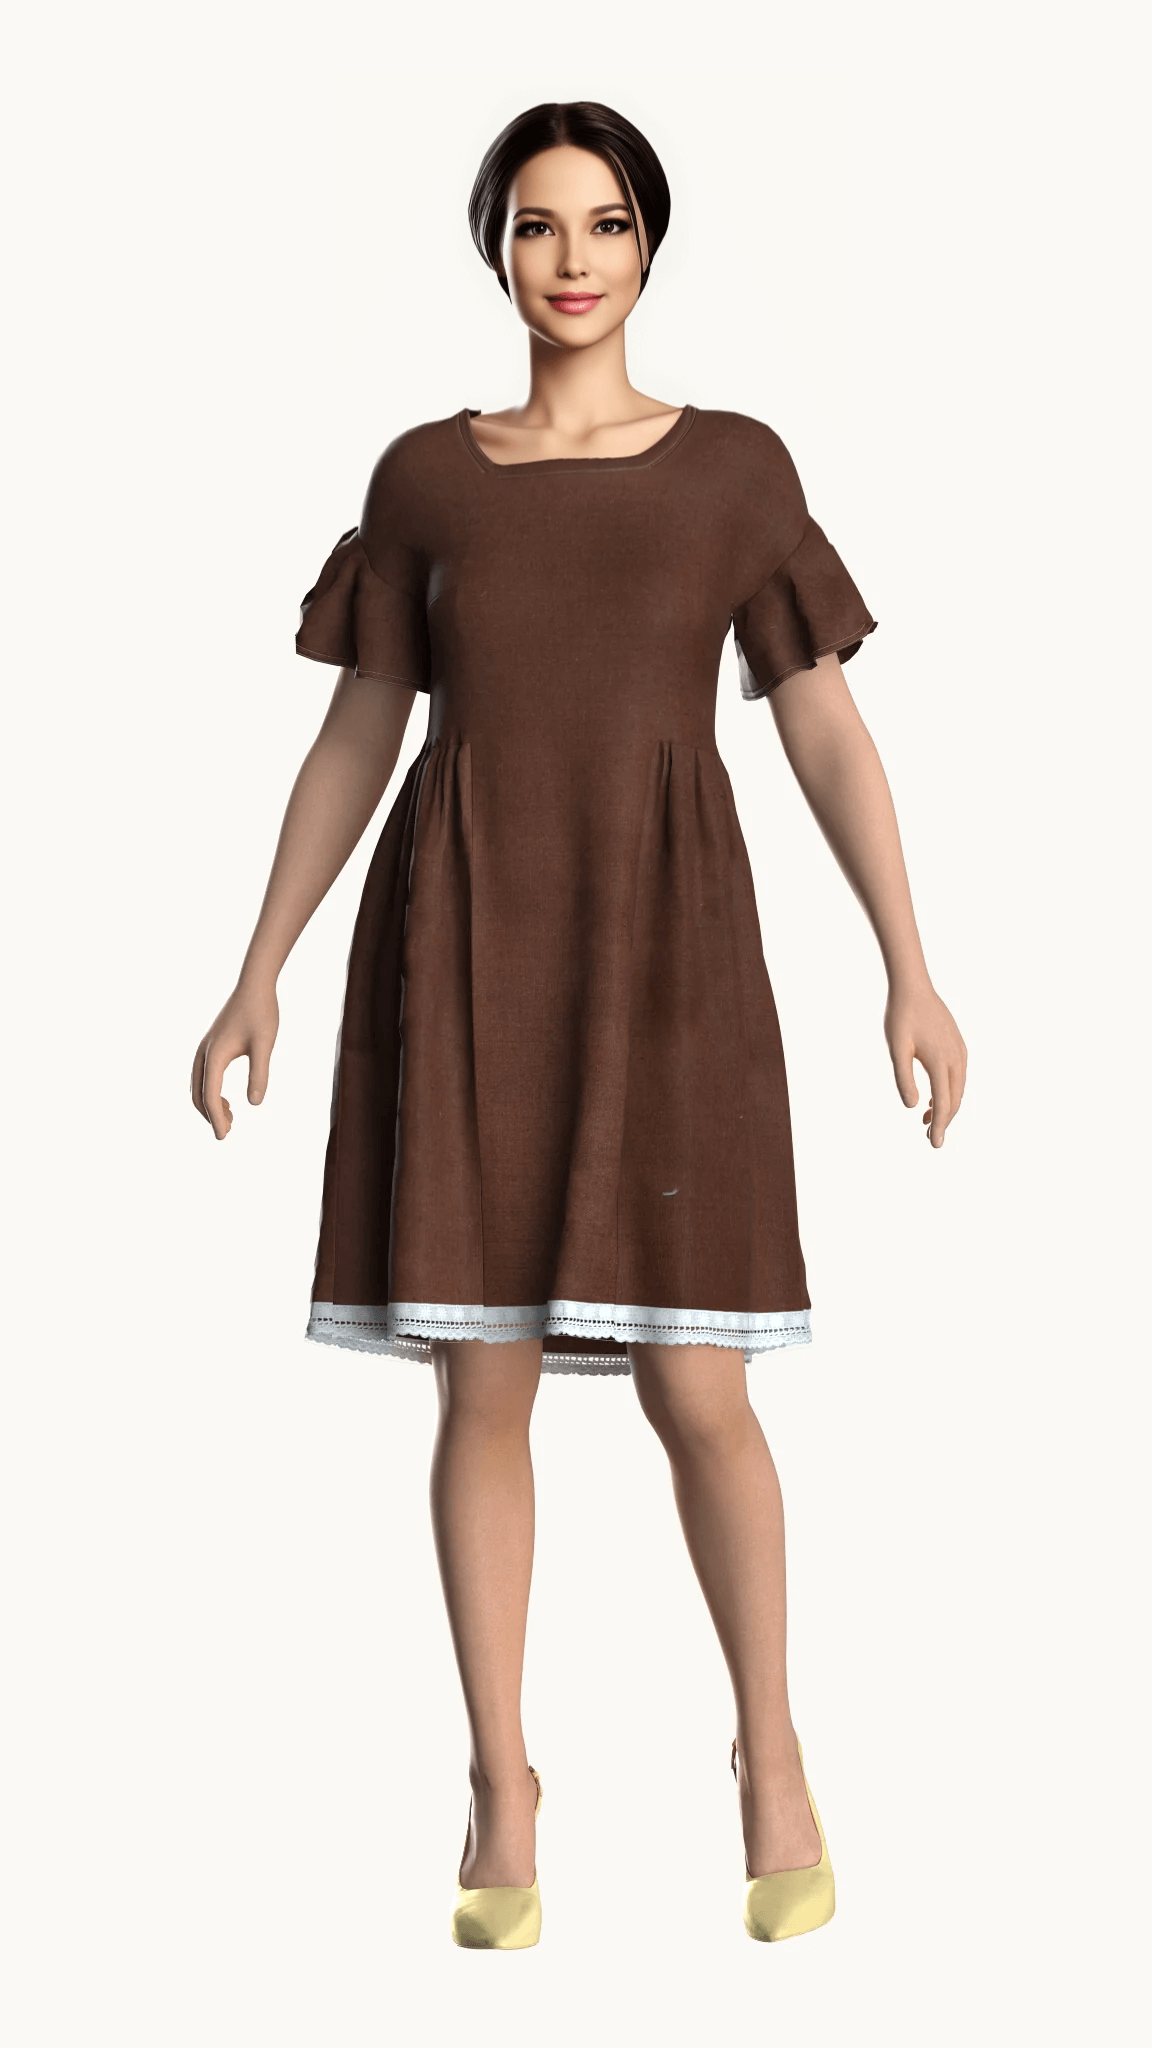 house of supr , made to fit , brown dress, suitable for formal office wear